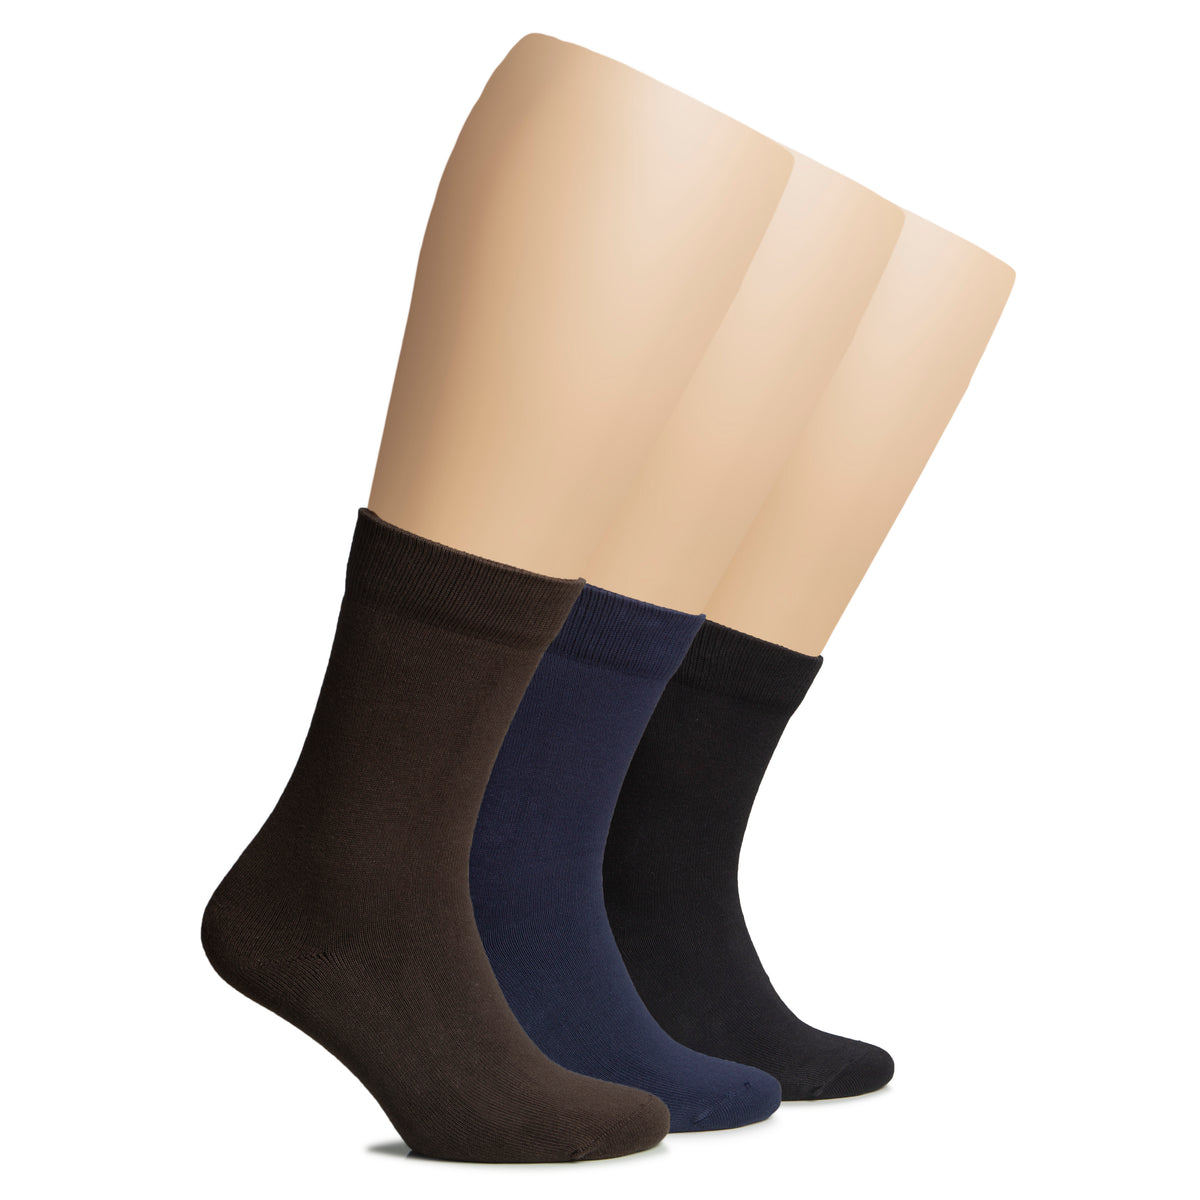 The image displays three sets of women's socks in distinct colors - brown, blue, and black. These are Women's Winter Cotton Crew Socks.